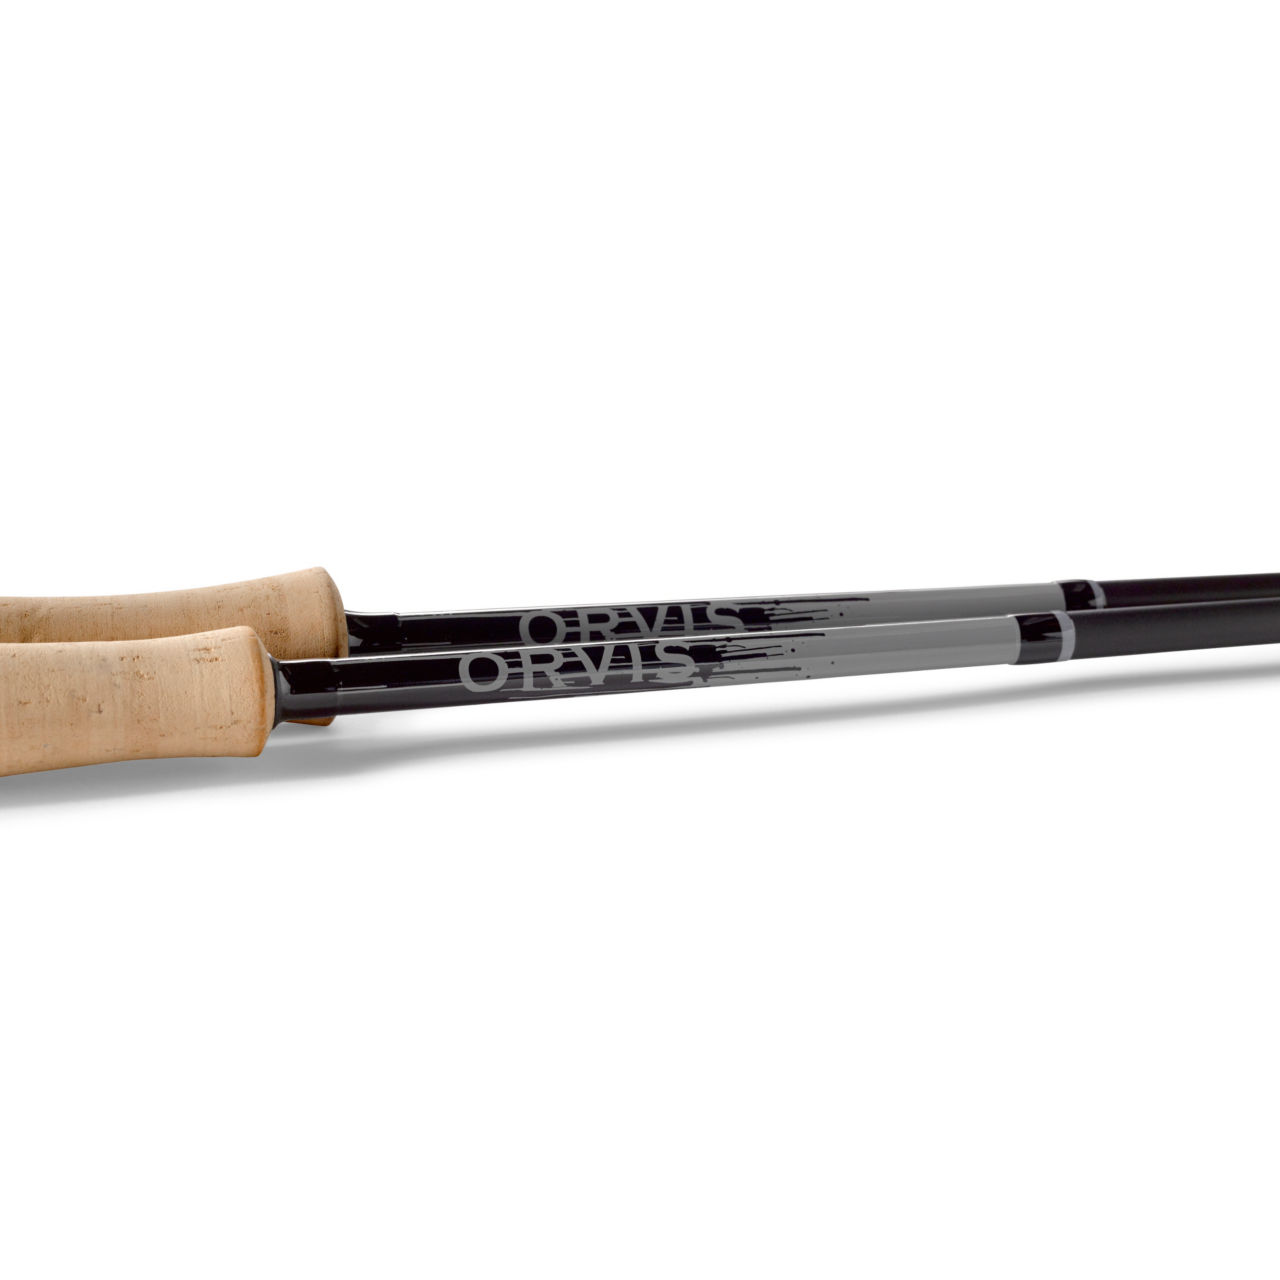 Helios™ 3 Blackout Fly Rod -  image number 3